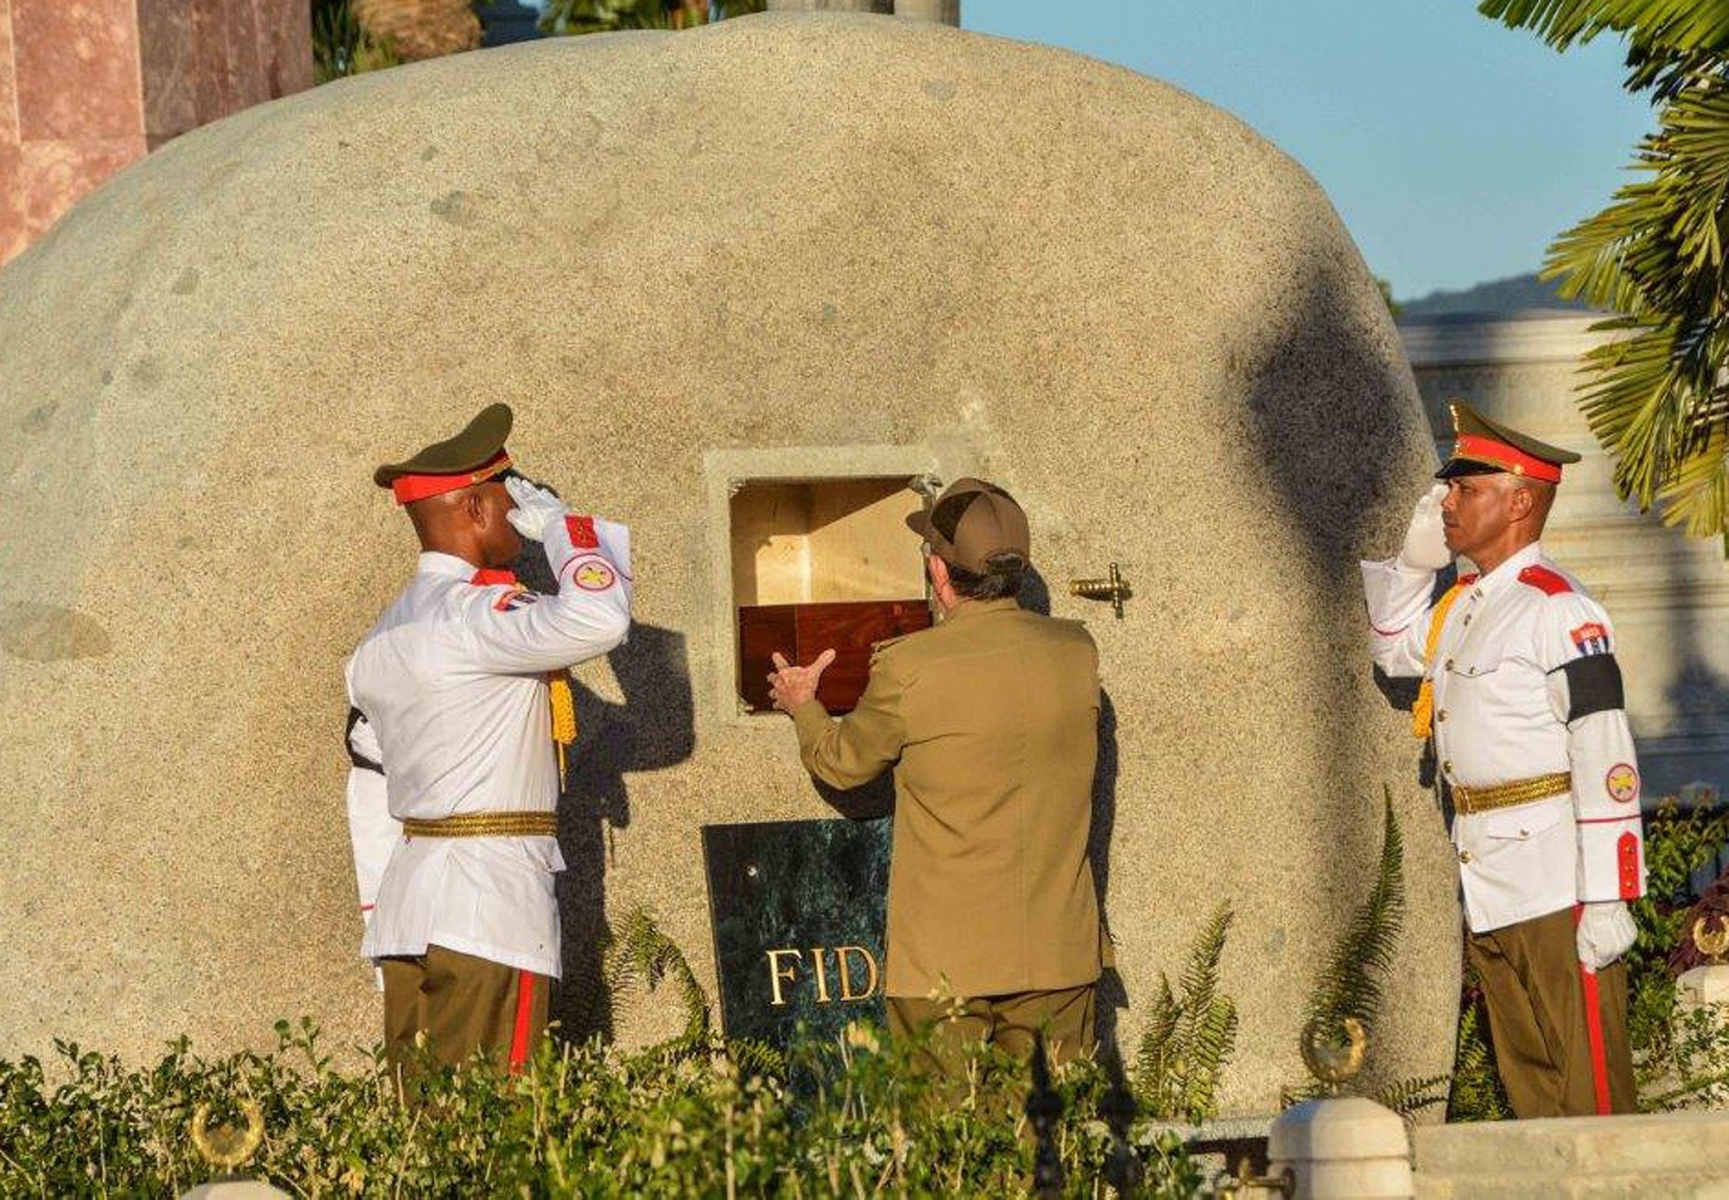 Cuba's President Raul Castro places the ashes of his older brother Fidel Castro into a niche in his tomb, a simple, grey, round stone about 15 feet high at the Santa Ifigenia cemetery in Santiago, Cuba, Sunday Dec.4, 2016. The niche was then covered by a plaque bearing the single name,"Fidel."(Marcelino Vazquez Hernandez/Pool Photo via AP) Cuba Fidel Castro